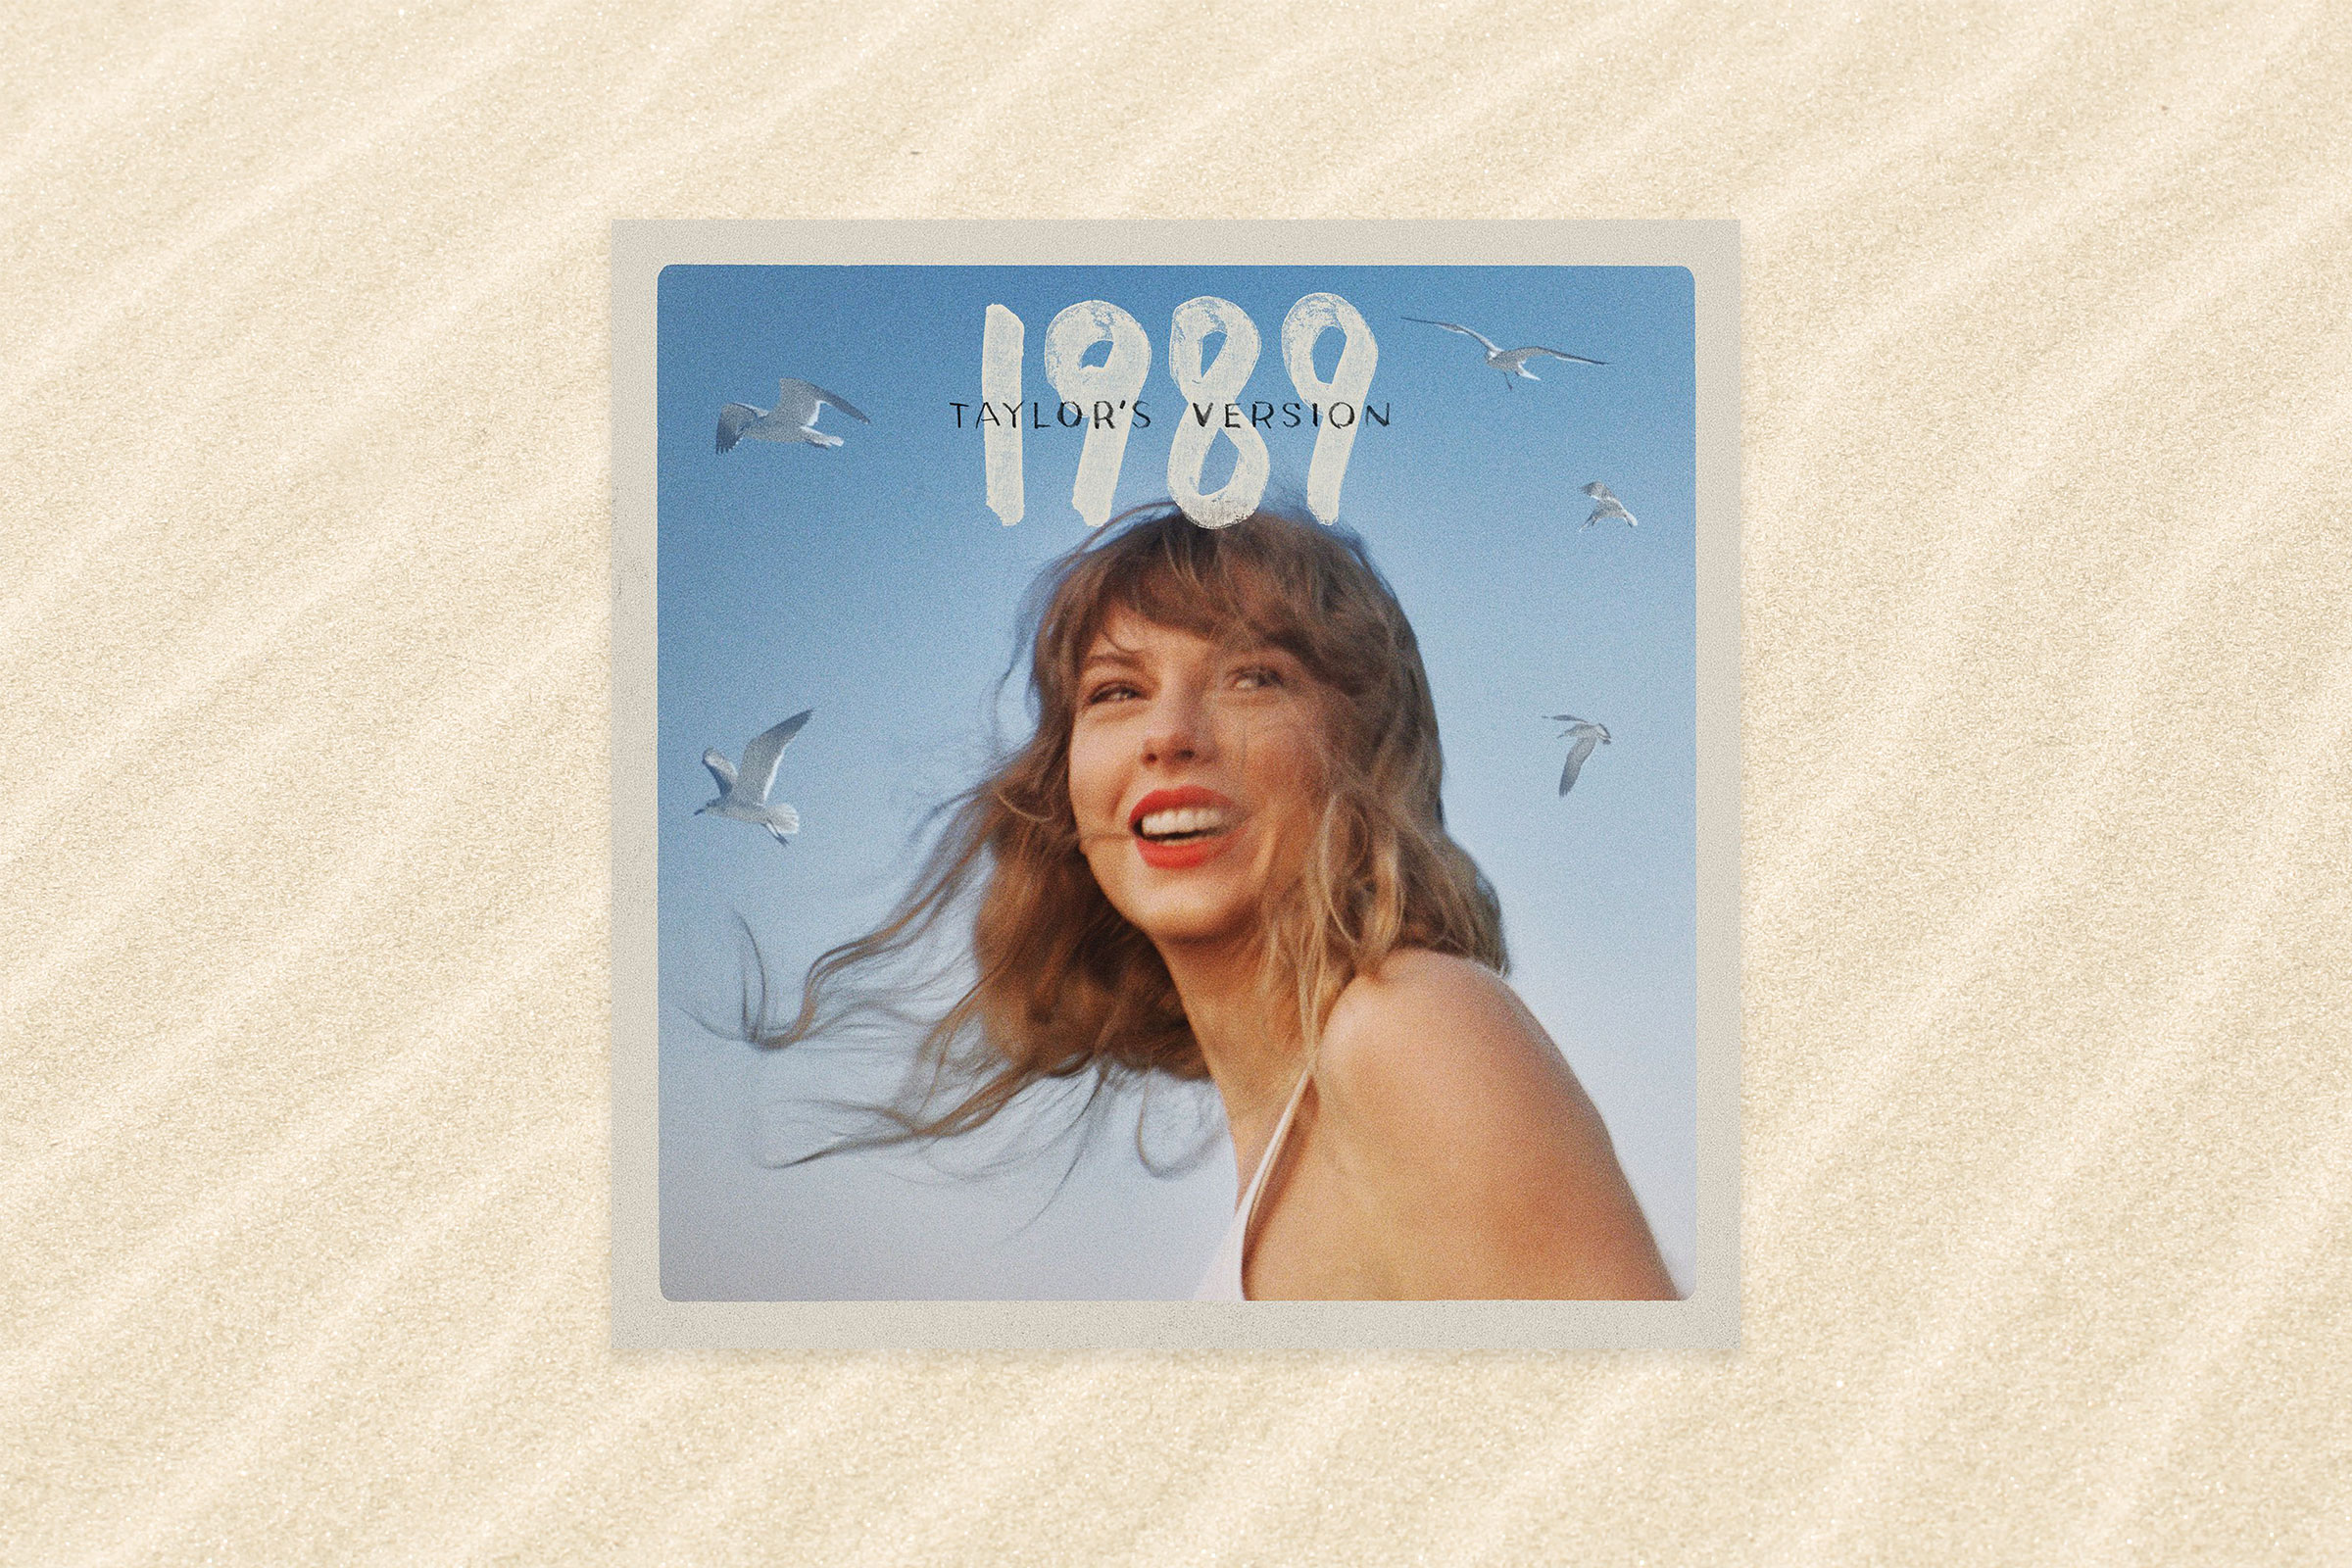 The album cover for 1989 Taylor's Version that shows Taylor Swift smiling with windblown hair with blue sky and birds flying behind her